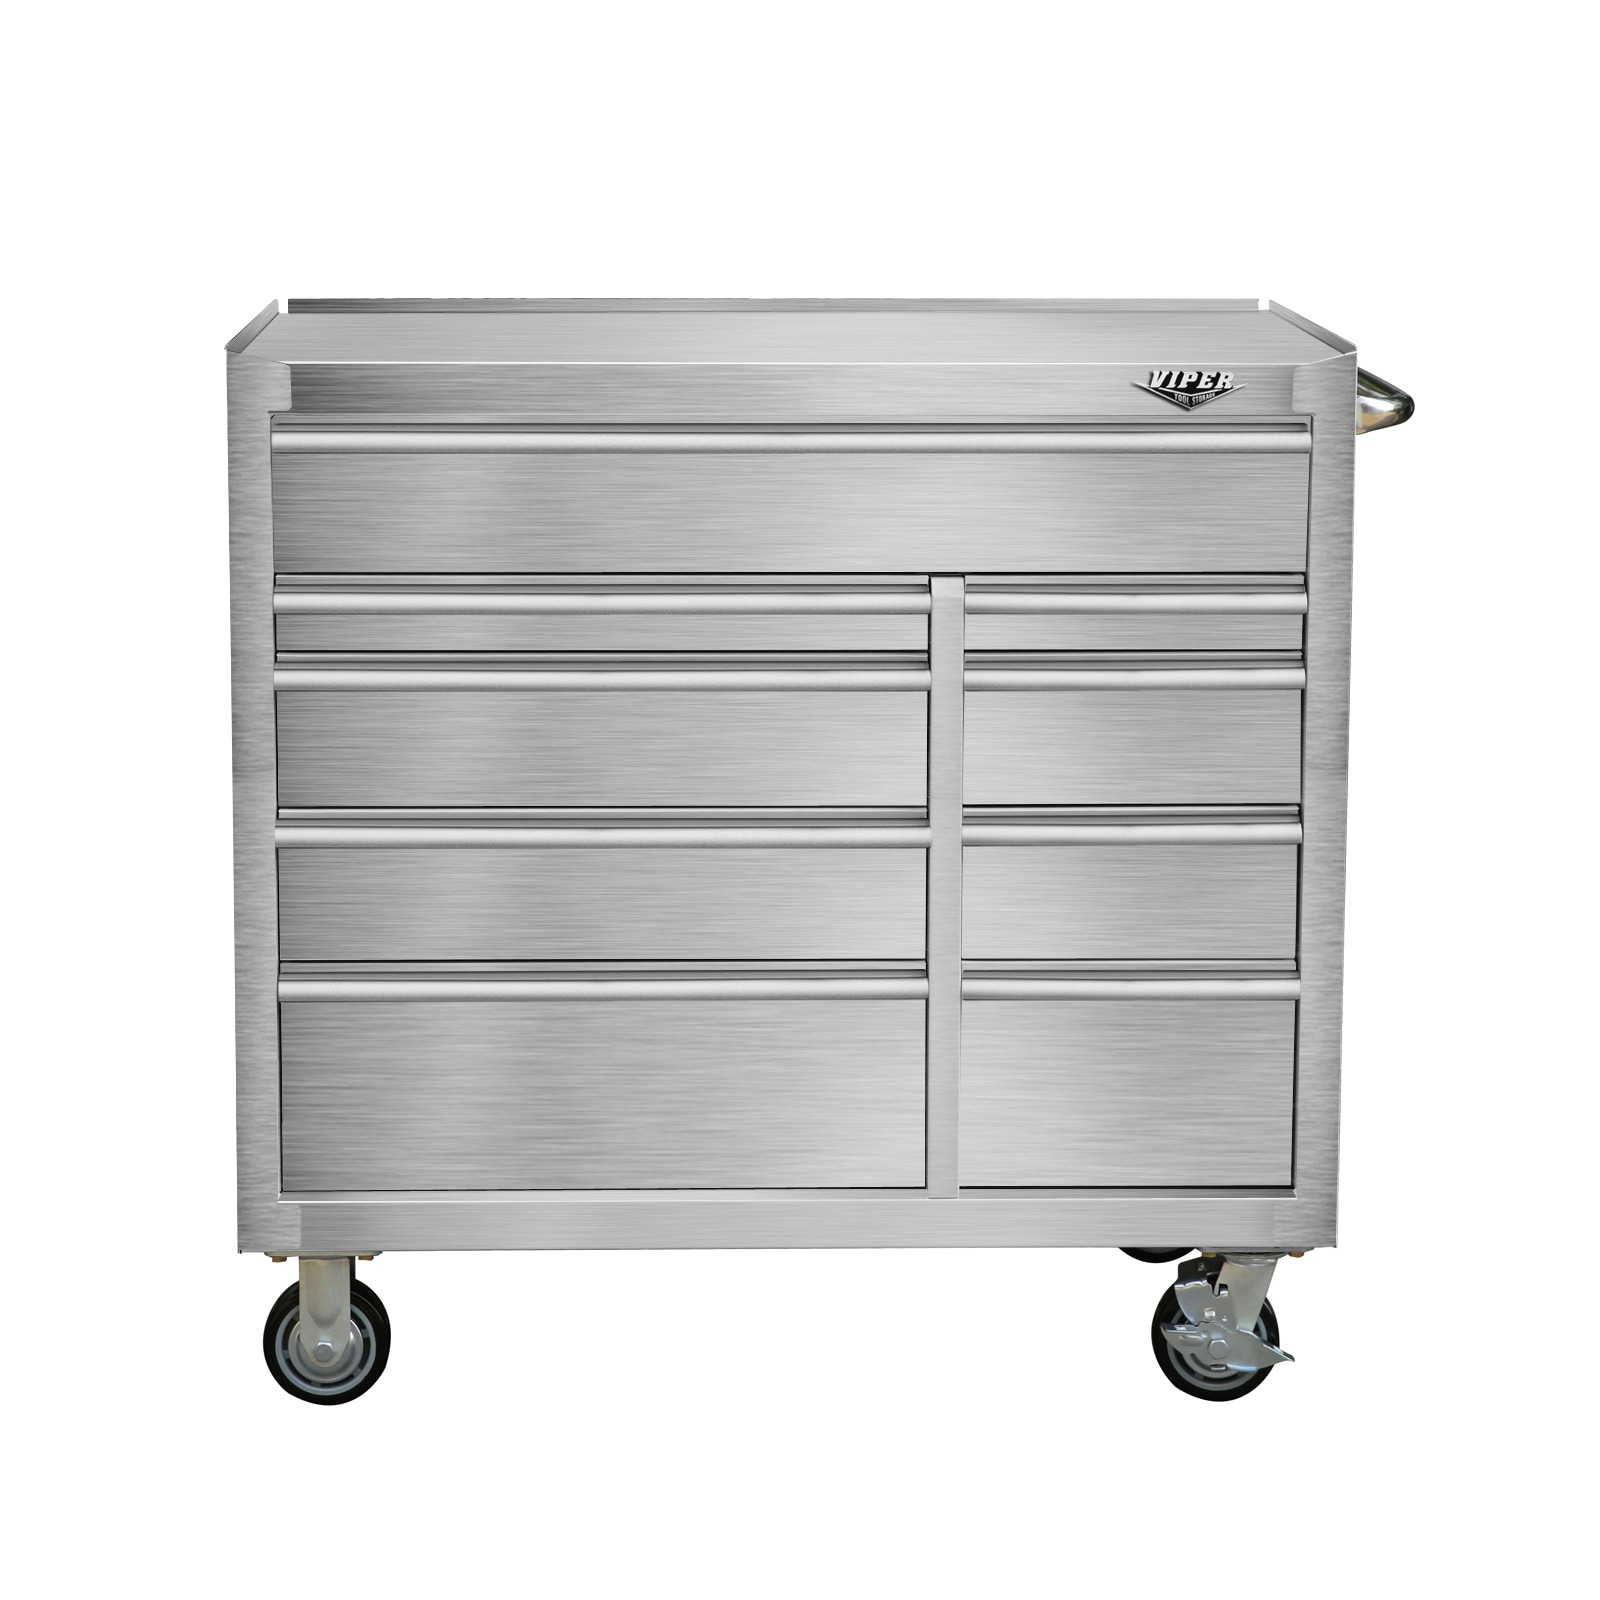 41.5-in W x 40.8-in H 9-Drawer Stainless Steel Rolling Tool Cabinet (Stainless Steel) | - Viper Tool Storage V412409SSR